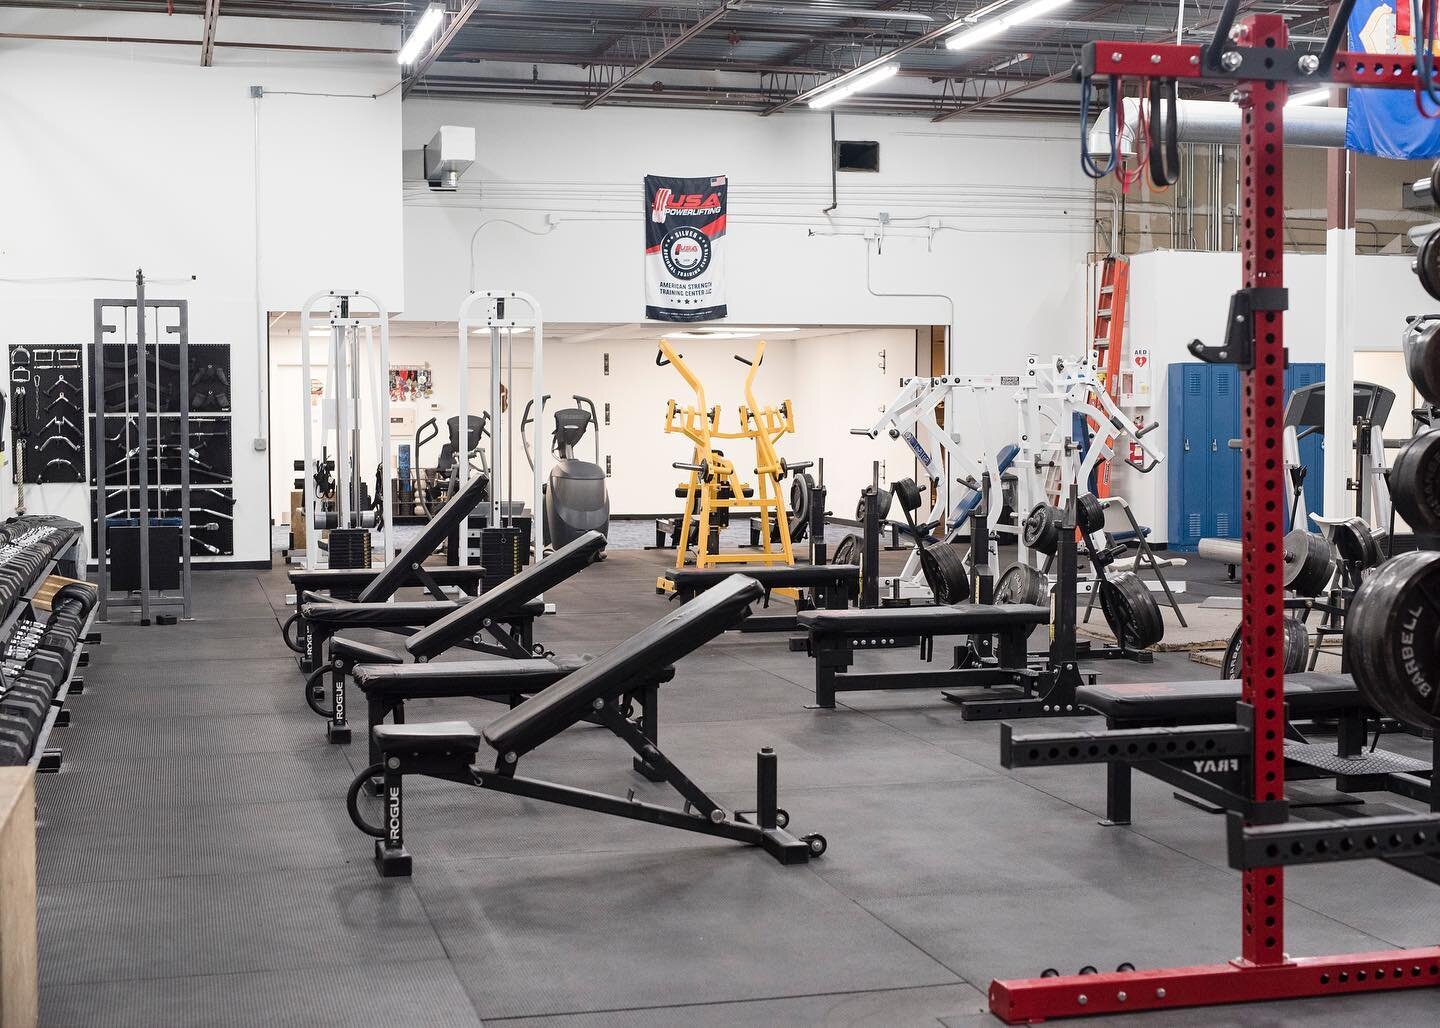 From Novice to the Elite: Powerlifting, Olympic Lifting, Strength and Conditioning and Fitness all come together. 

more info👇🏼
americanstrengthmn.com

#gym 
#powerlfitng 
#powerliftingmotivation
#coach #coaching #strengthandconditioning 
#squat #b